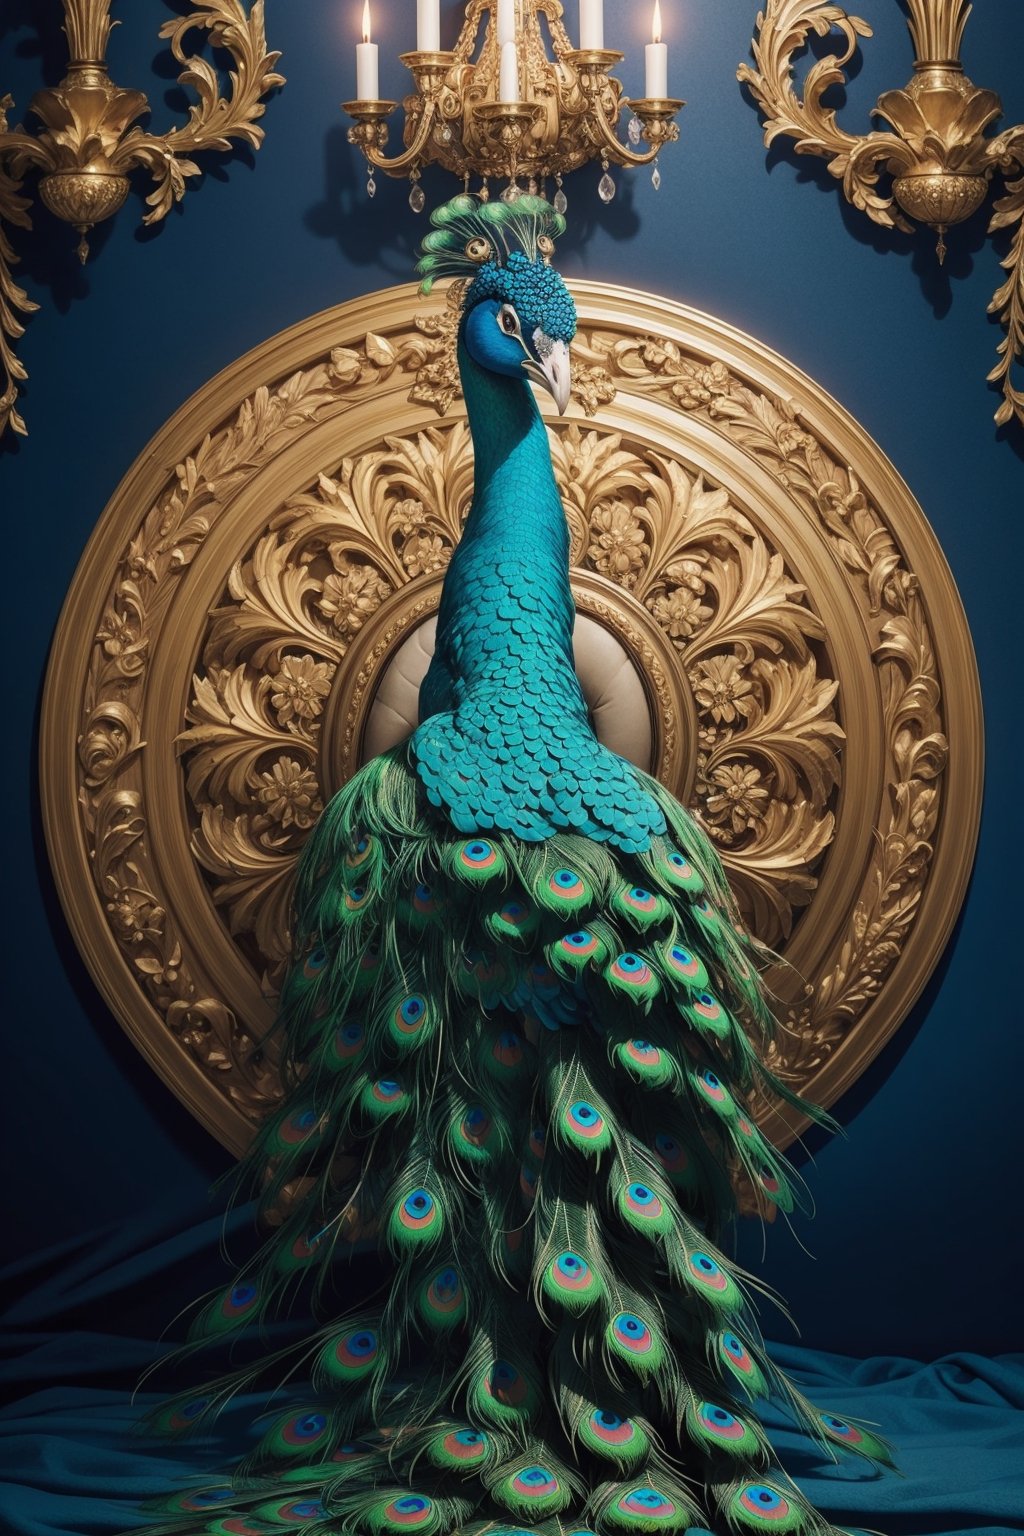 An ornate, baroque-inspired peacock with elaborate, swirling feathers.